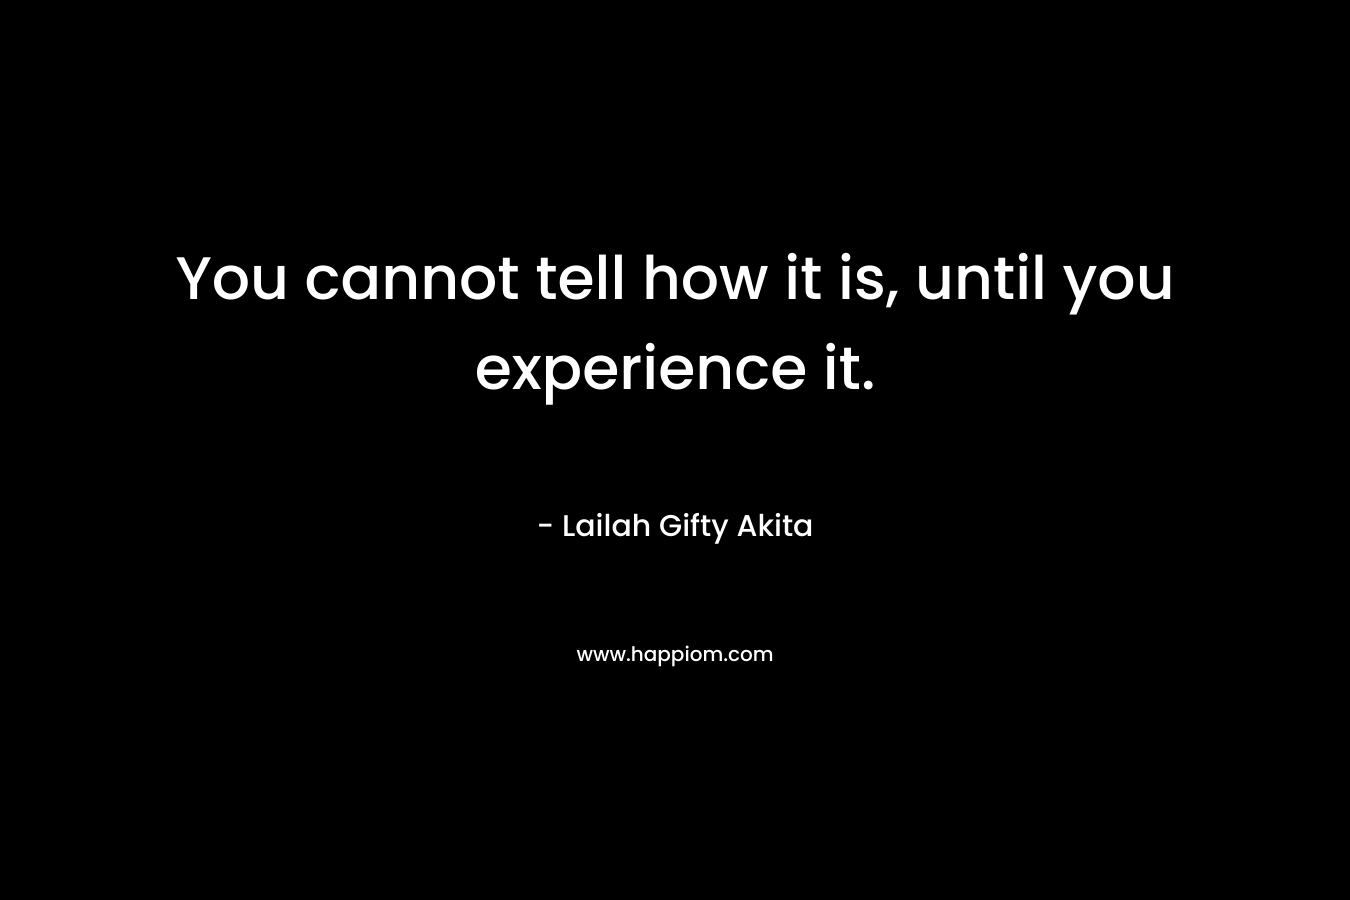 You cannot tell how it is, until you experience it.